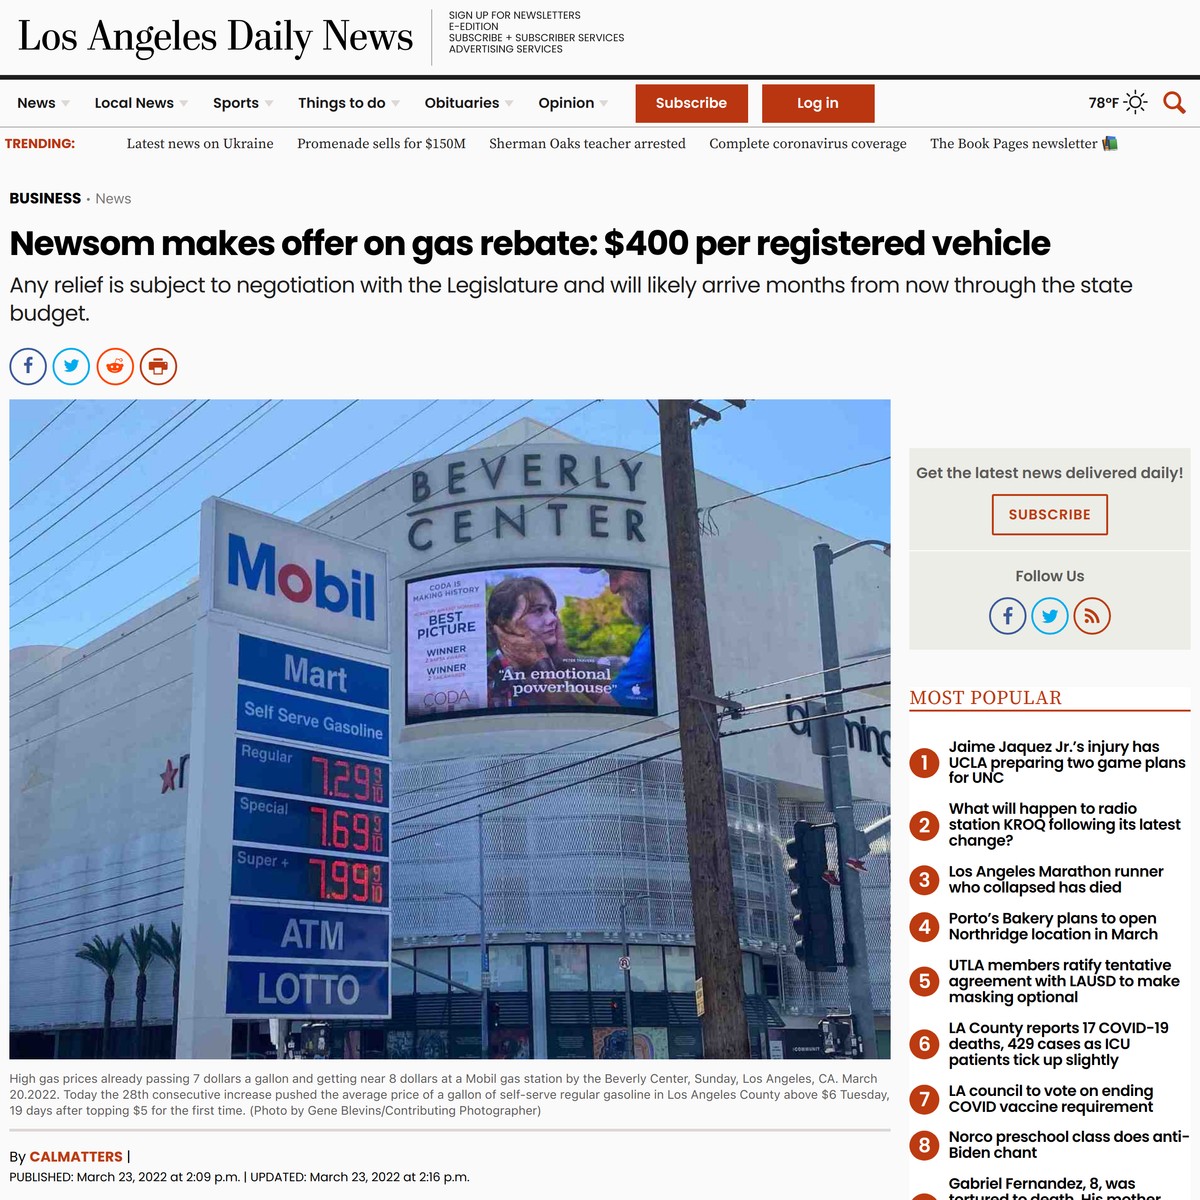 gov-newsom-announces-details-of-gas-rebate-proposal-that-would-send